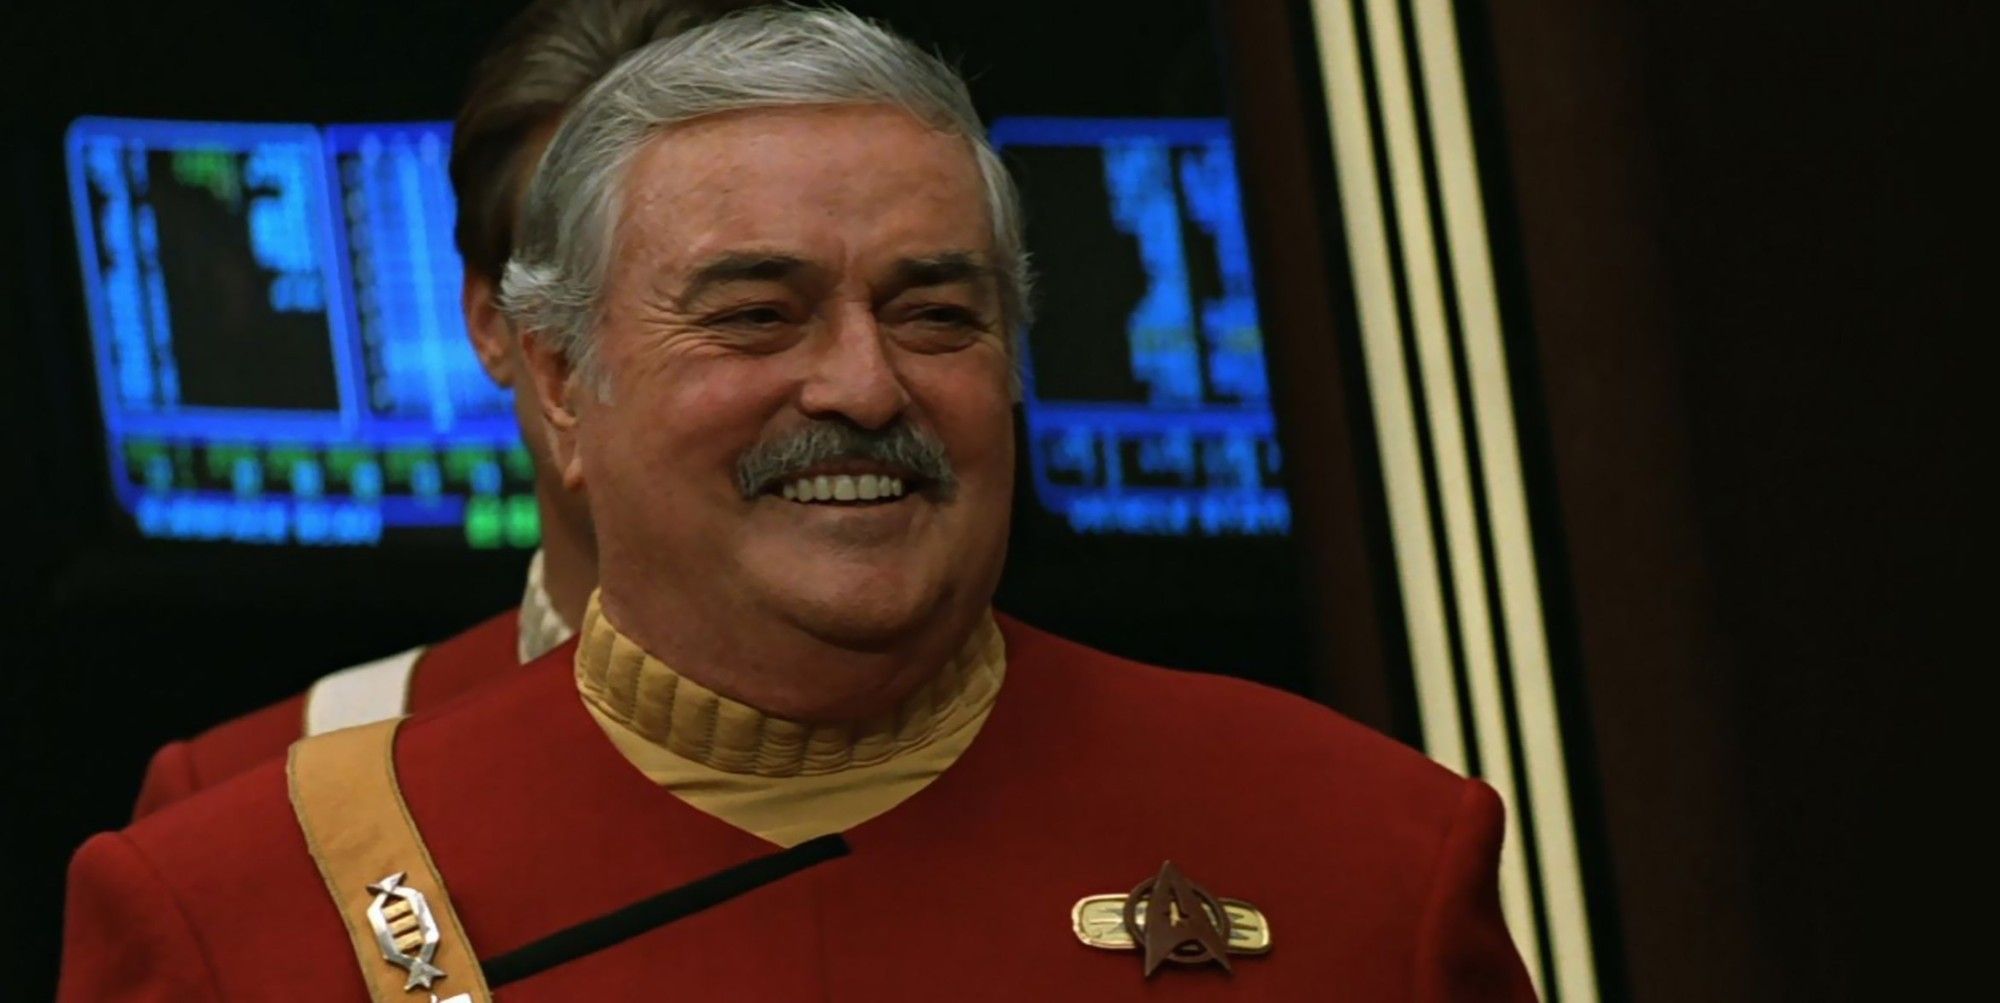 Star Trek actor James Doohan’s Ashes are kept secret aboard the ISS